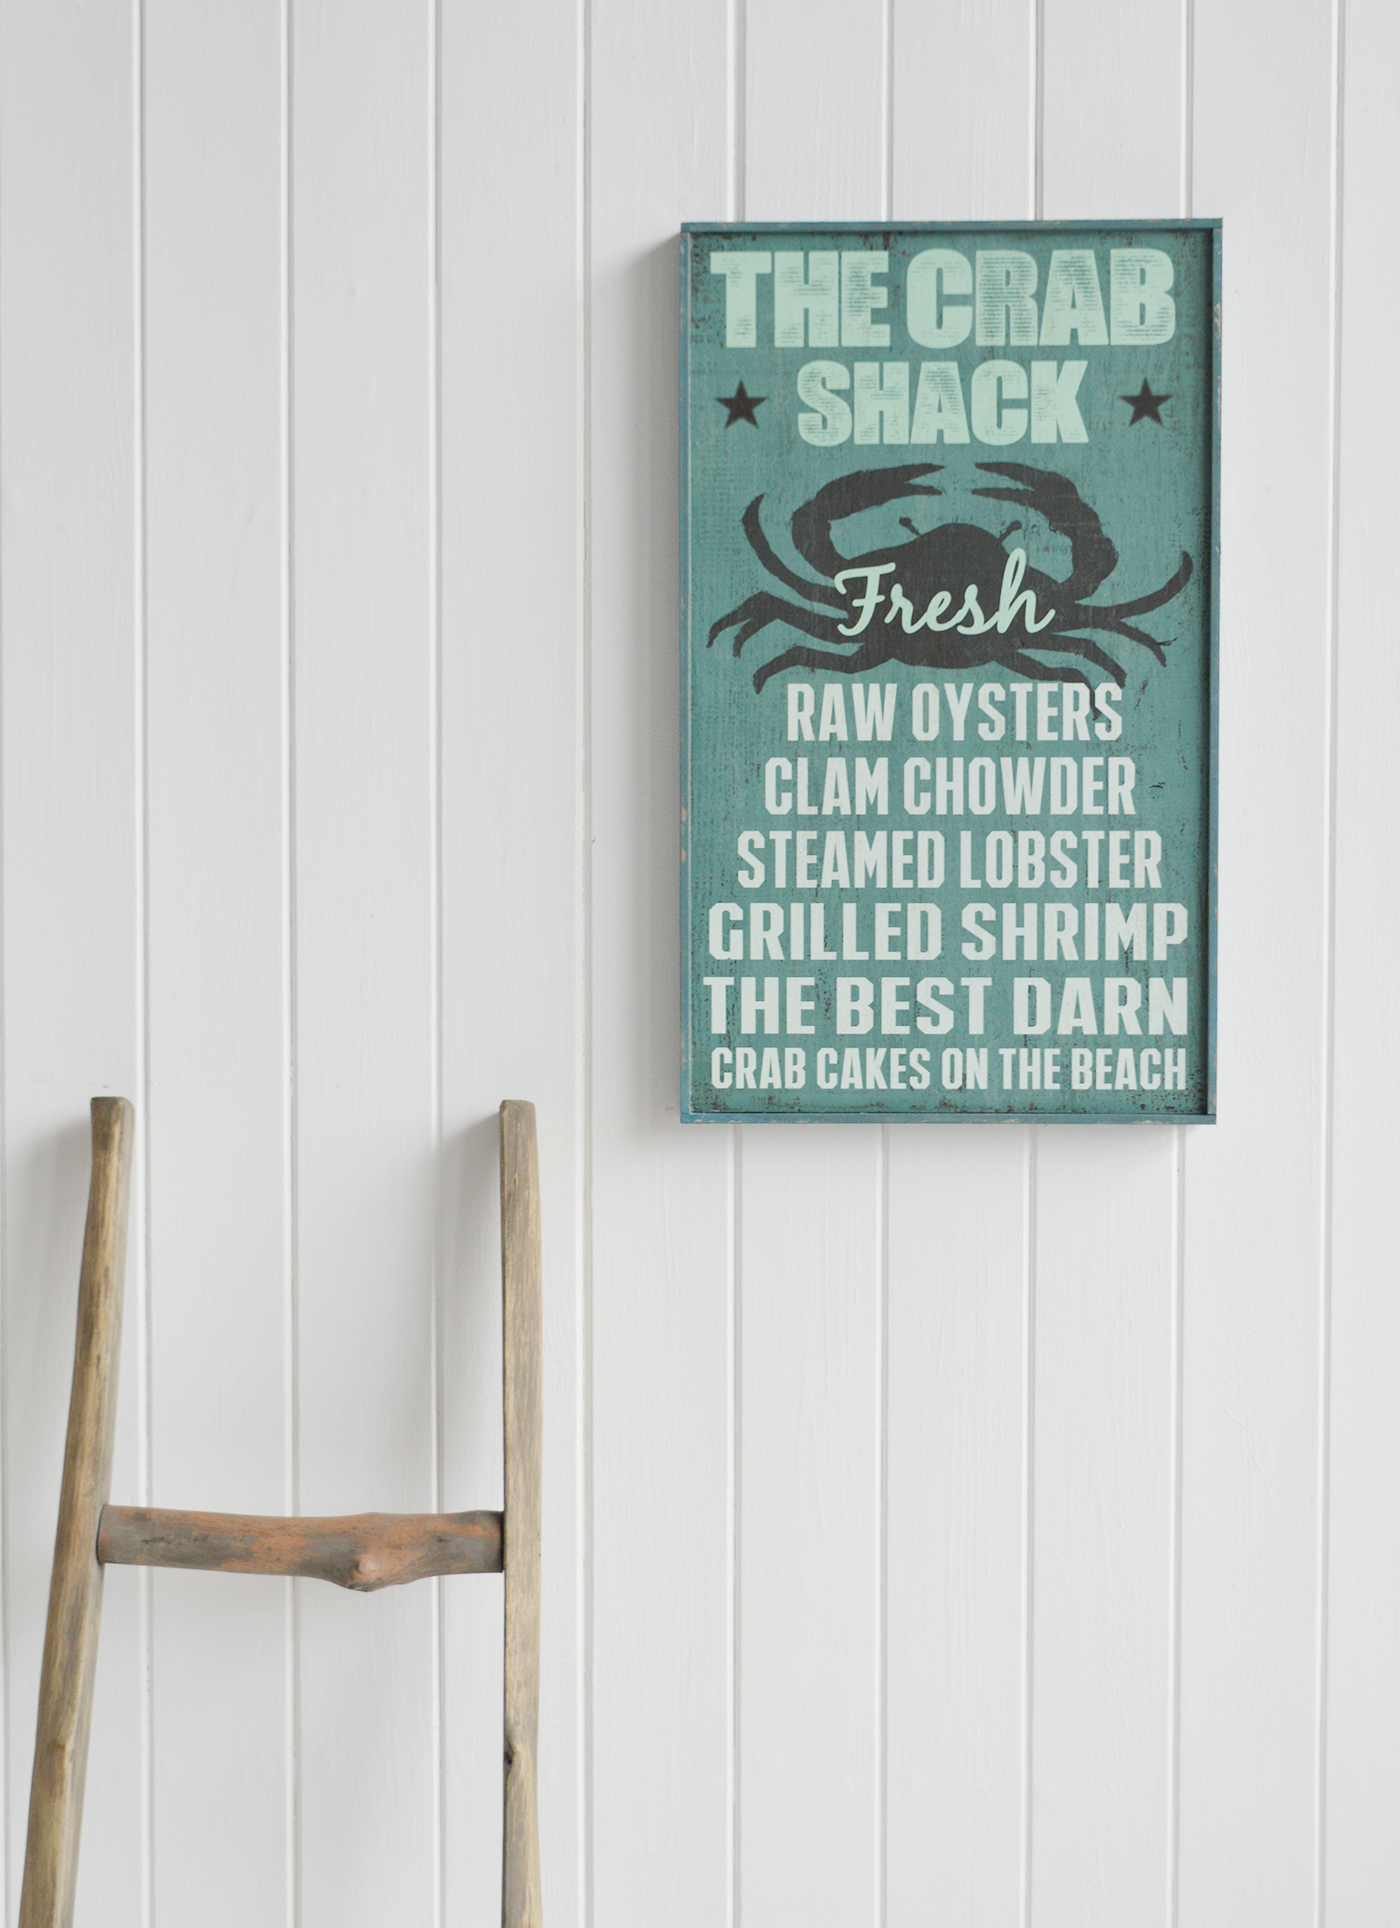 Nautical New England Coastal  Furniture and accessories for the home. A quirky, colourful Crab Shack New England sign typical for restaurants in the coastal areas the White Lighthouse Furniture and Home interiors